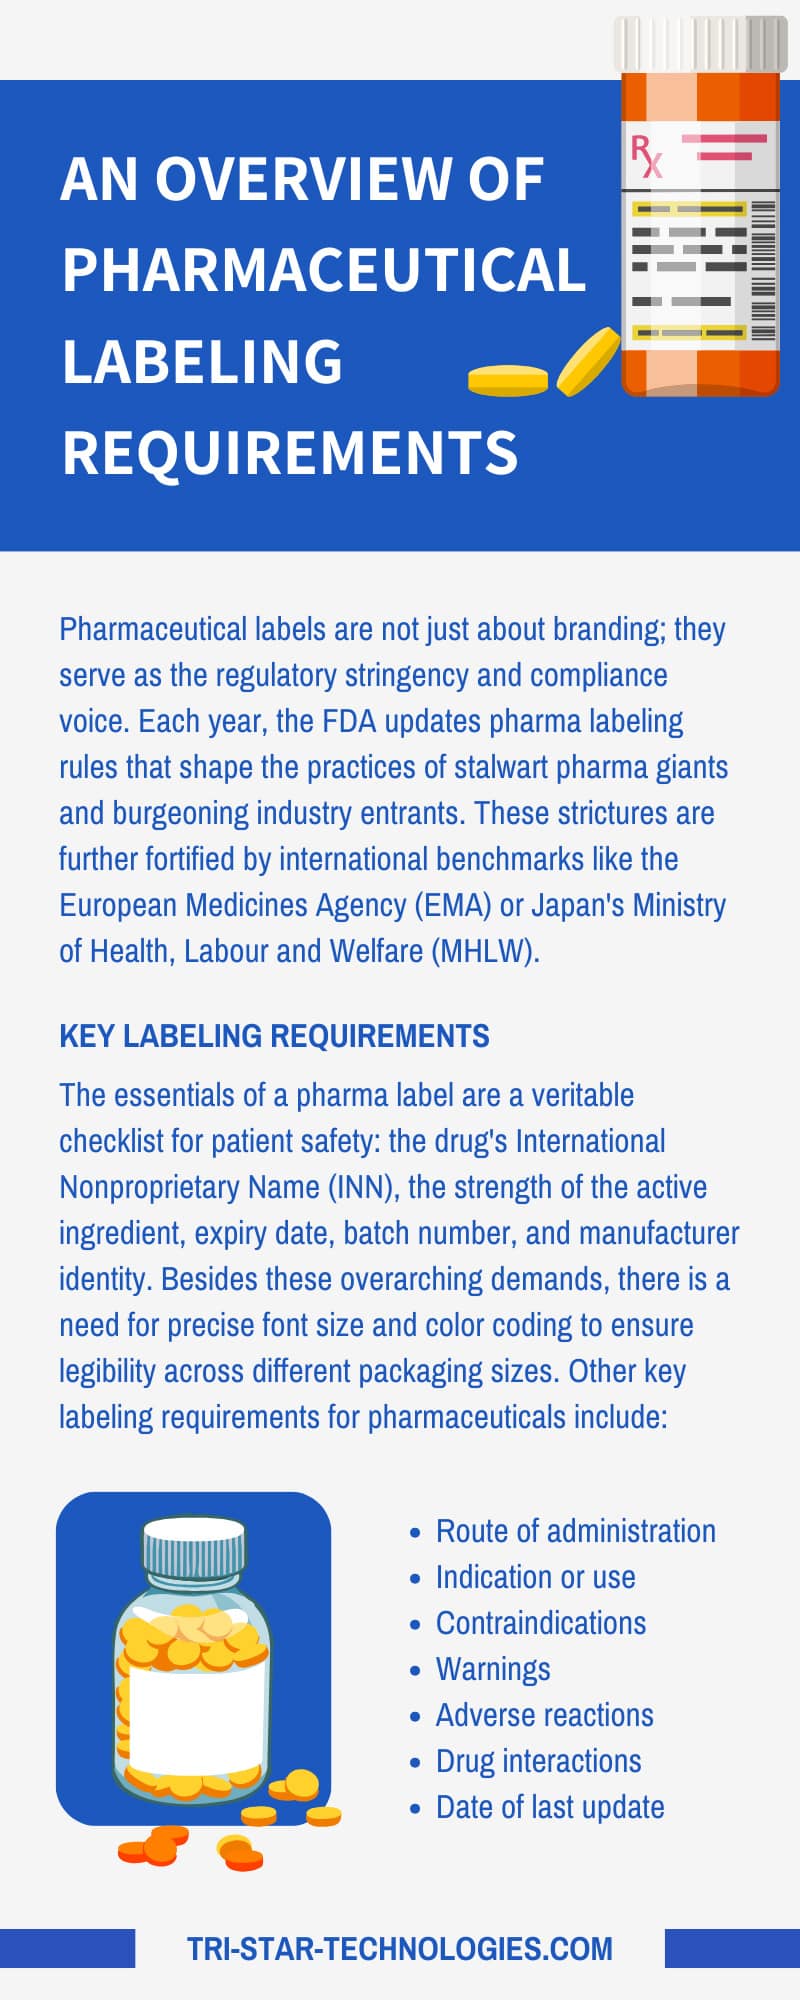 An Overview of Pharmaceutical Labeling Requirements